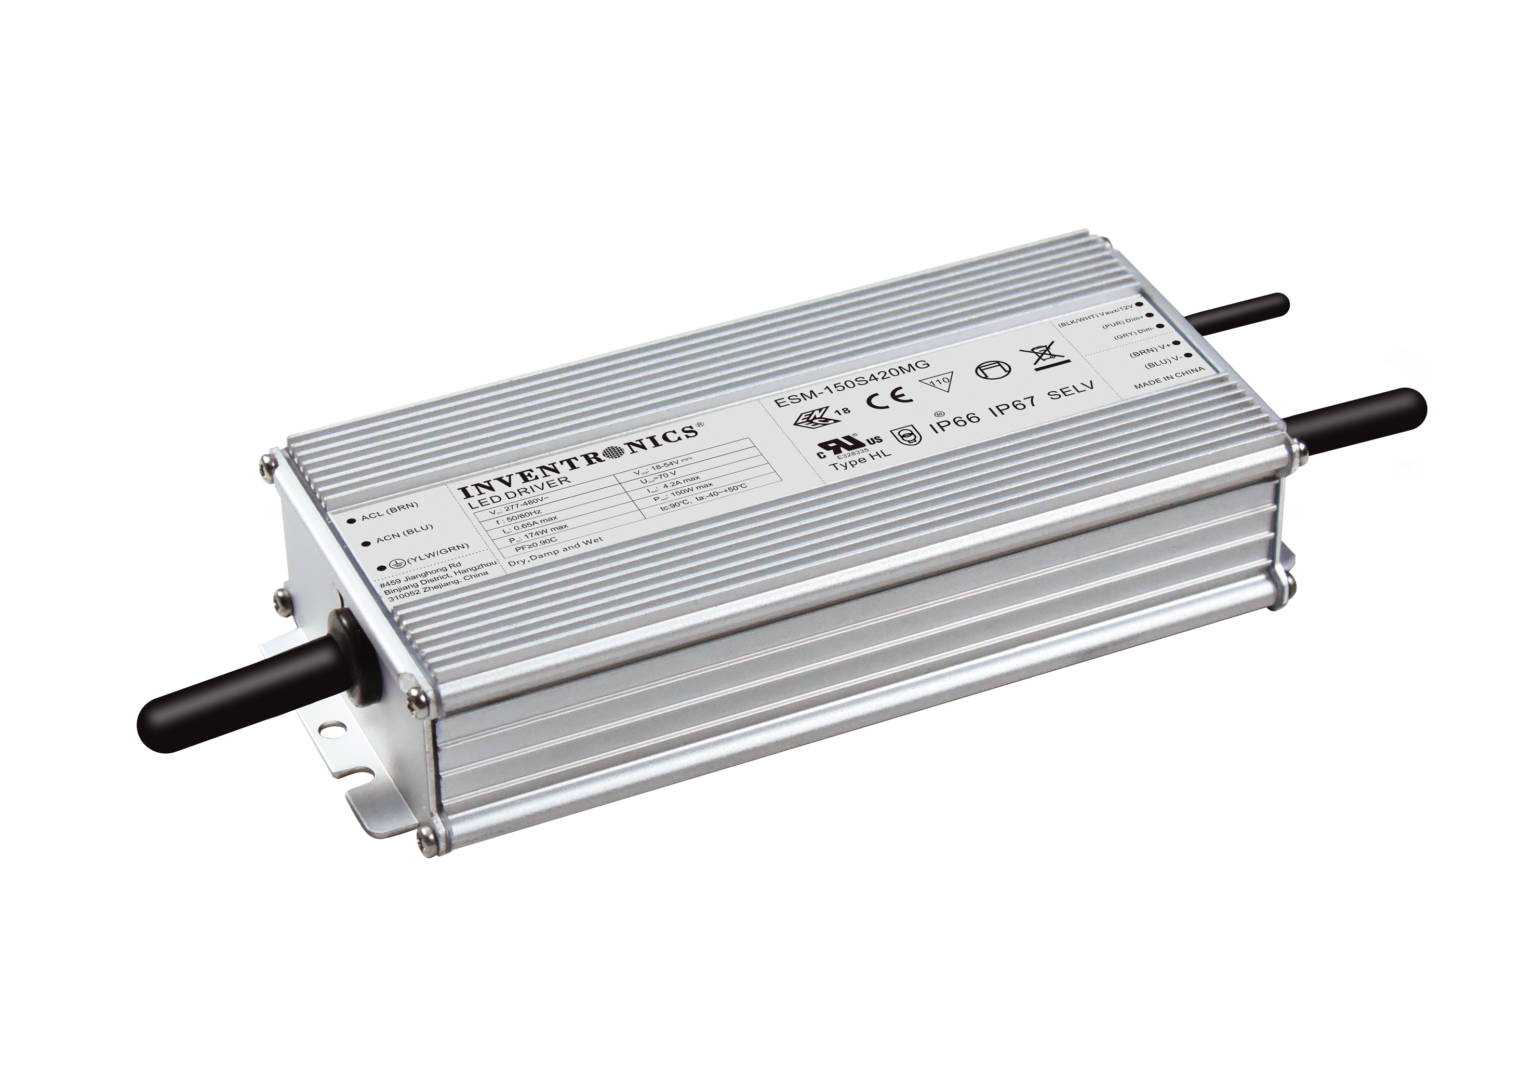 ESM-150SxxxMT - 150W High Input Voltage, Isolated Dimming LED Drivers